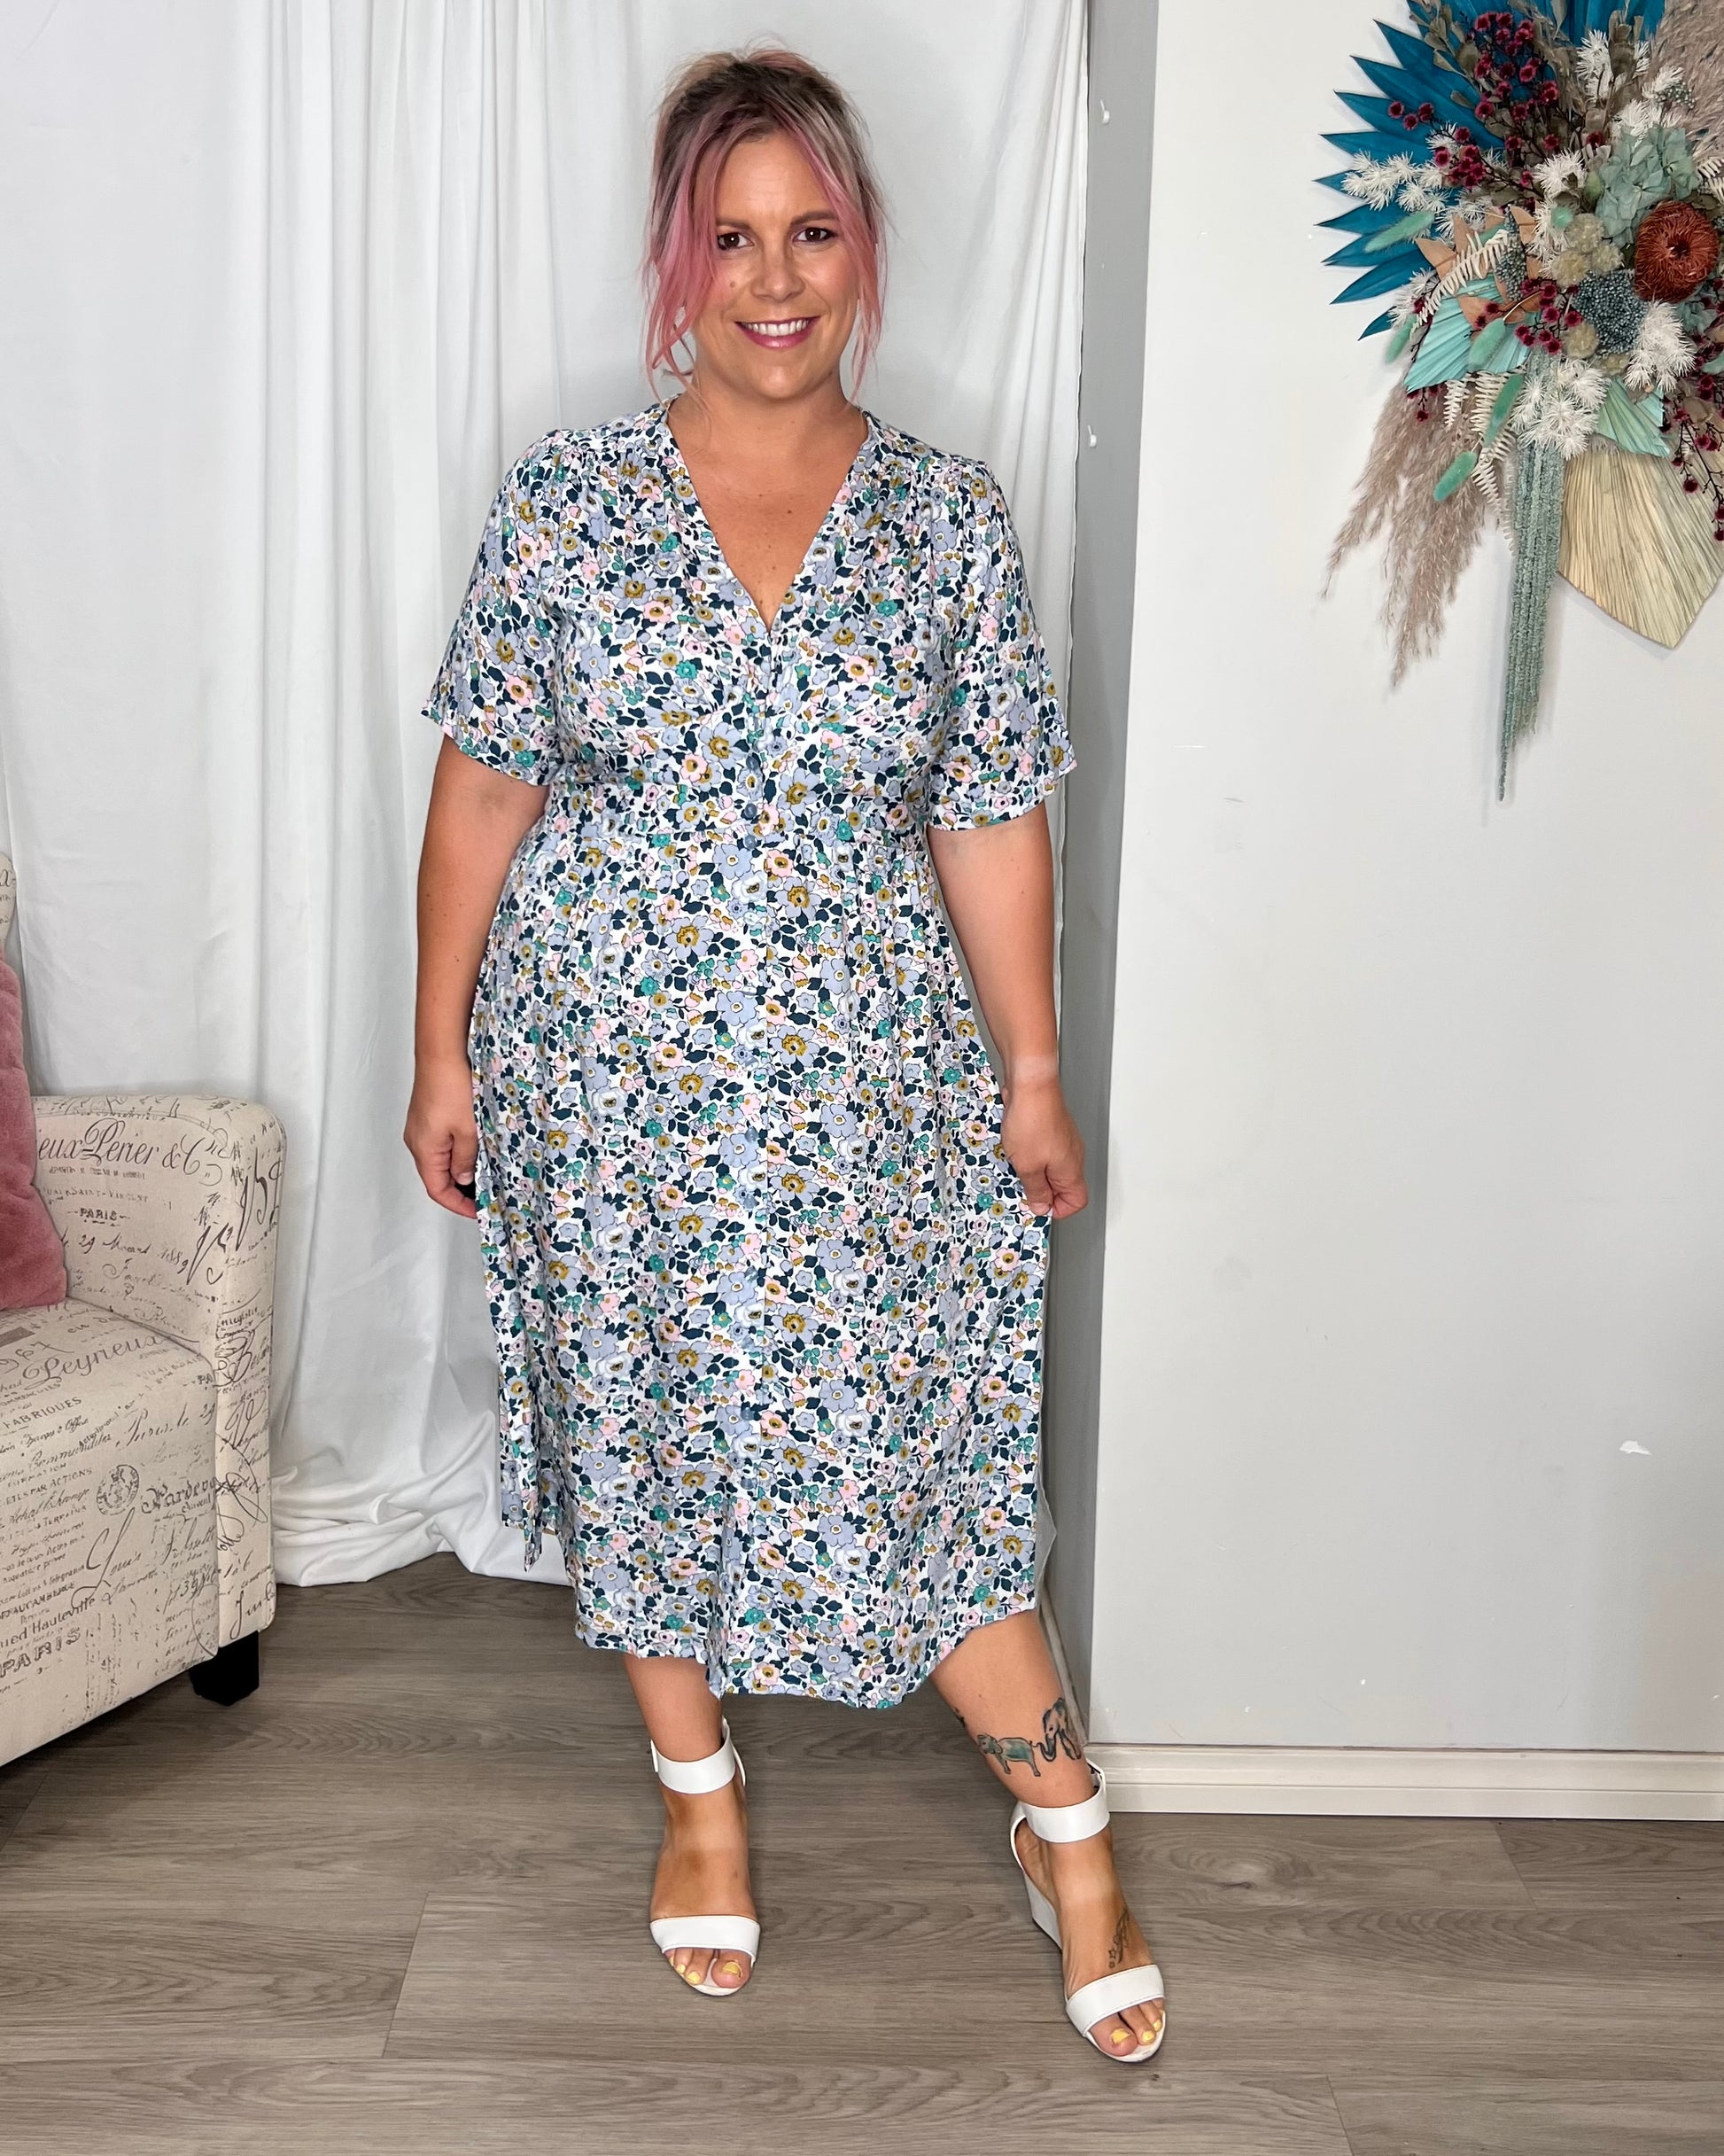 **NEW** Chessi Midi Dress: 


The Chessi Dress is a stunning feminine style, hugging the figure in all the right places. A classic dress that you will reach for again &amp; again, perfect for  - Ciao Bella Dresses - Freez